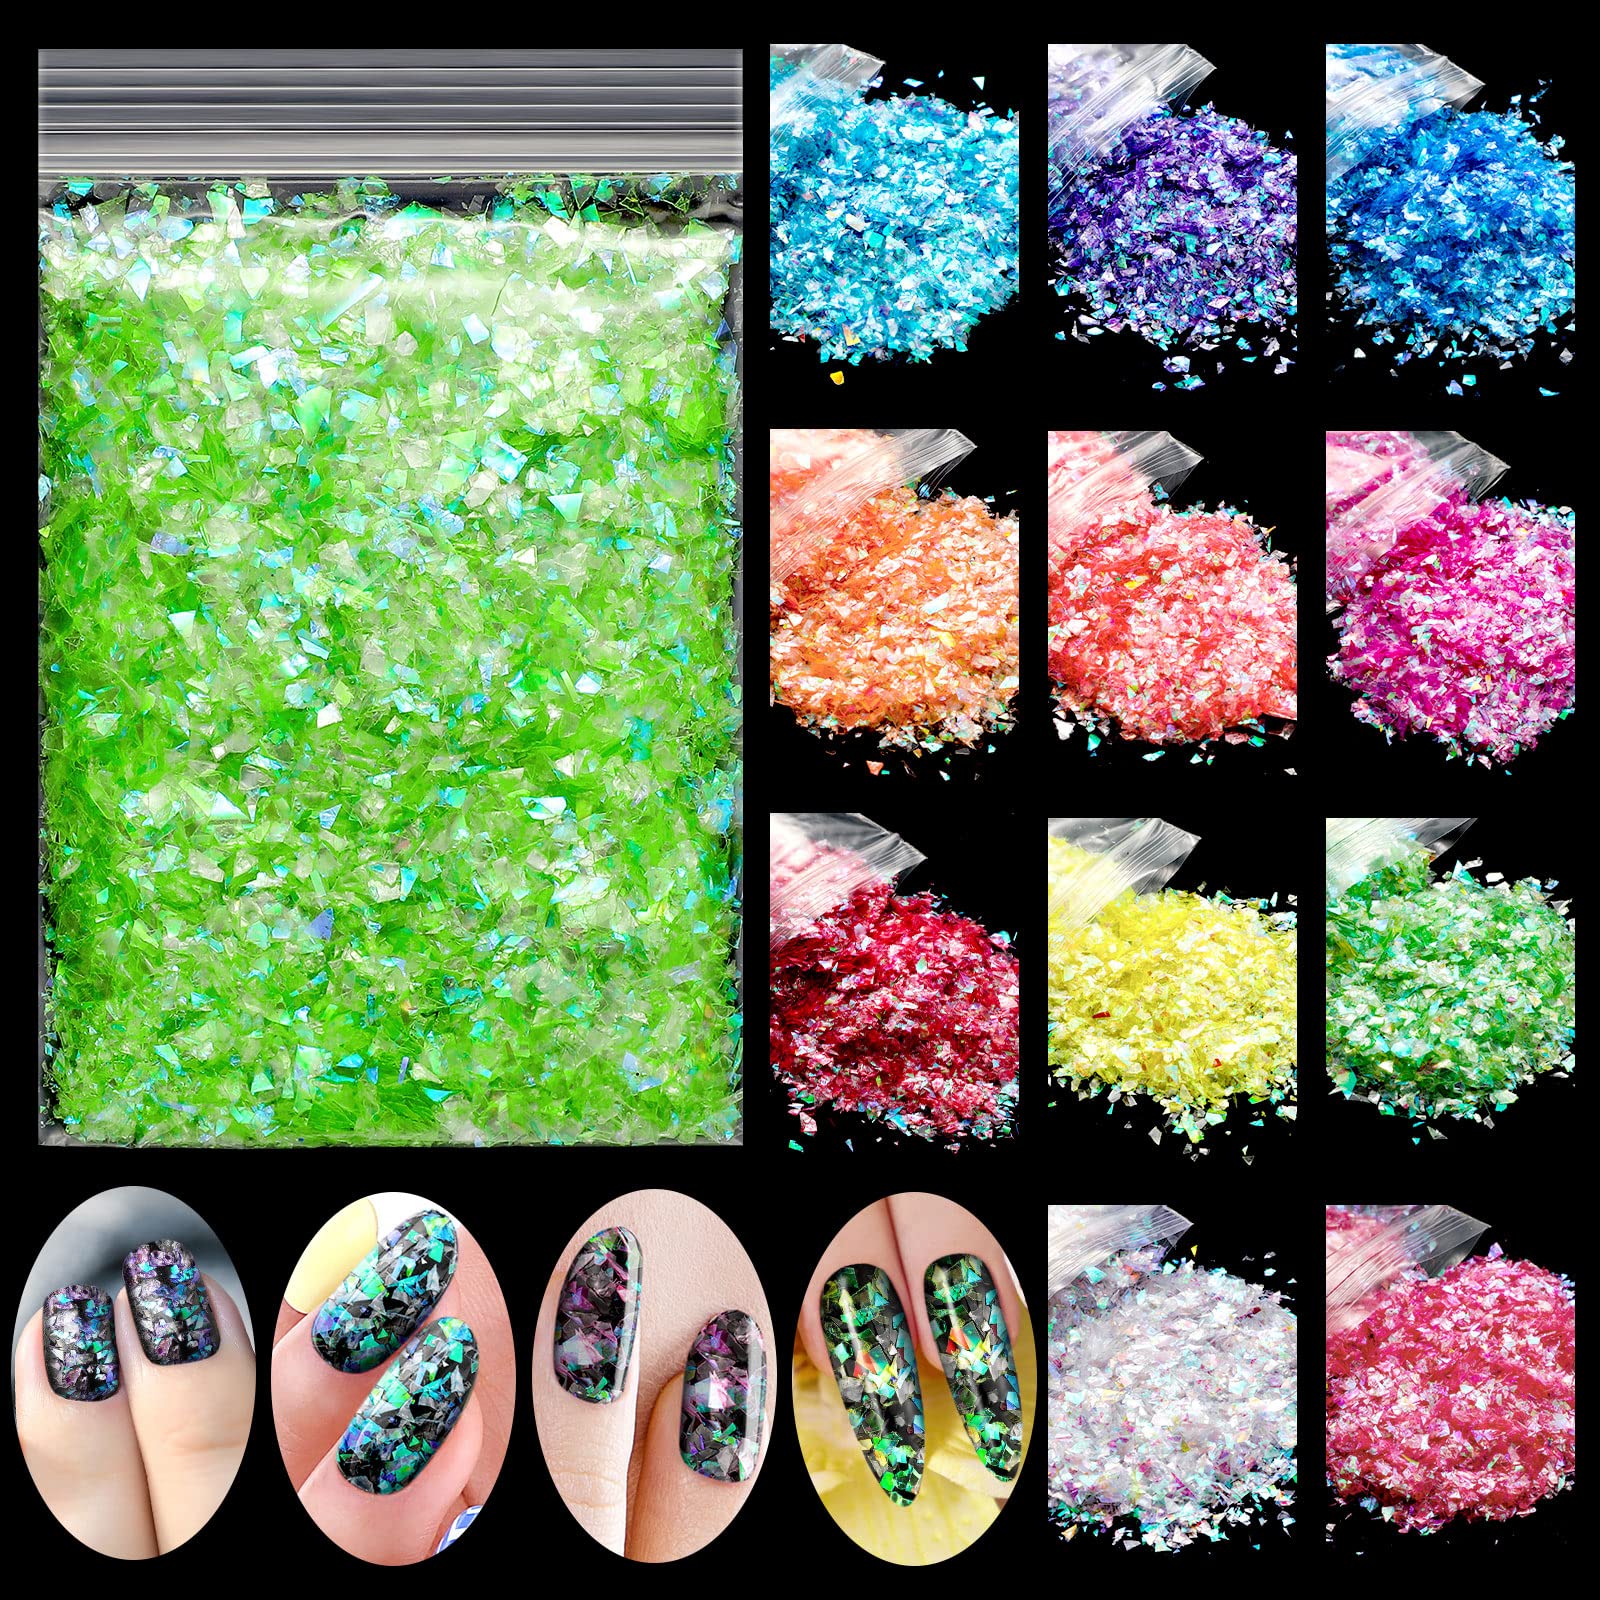 Holographic Glitter Paper Photos and Images